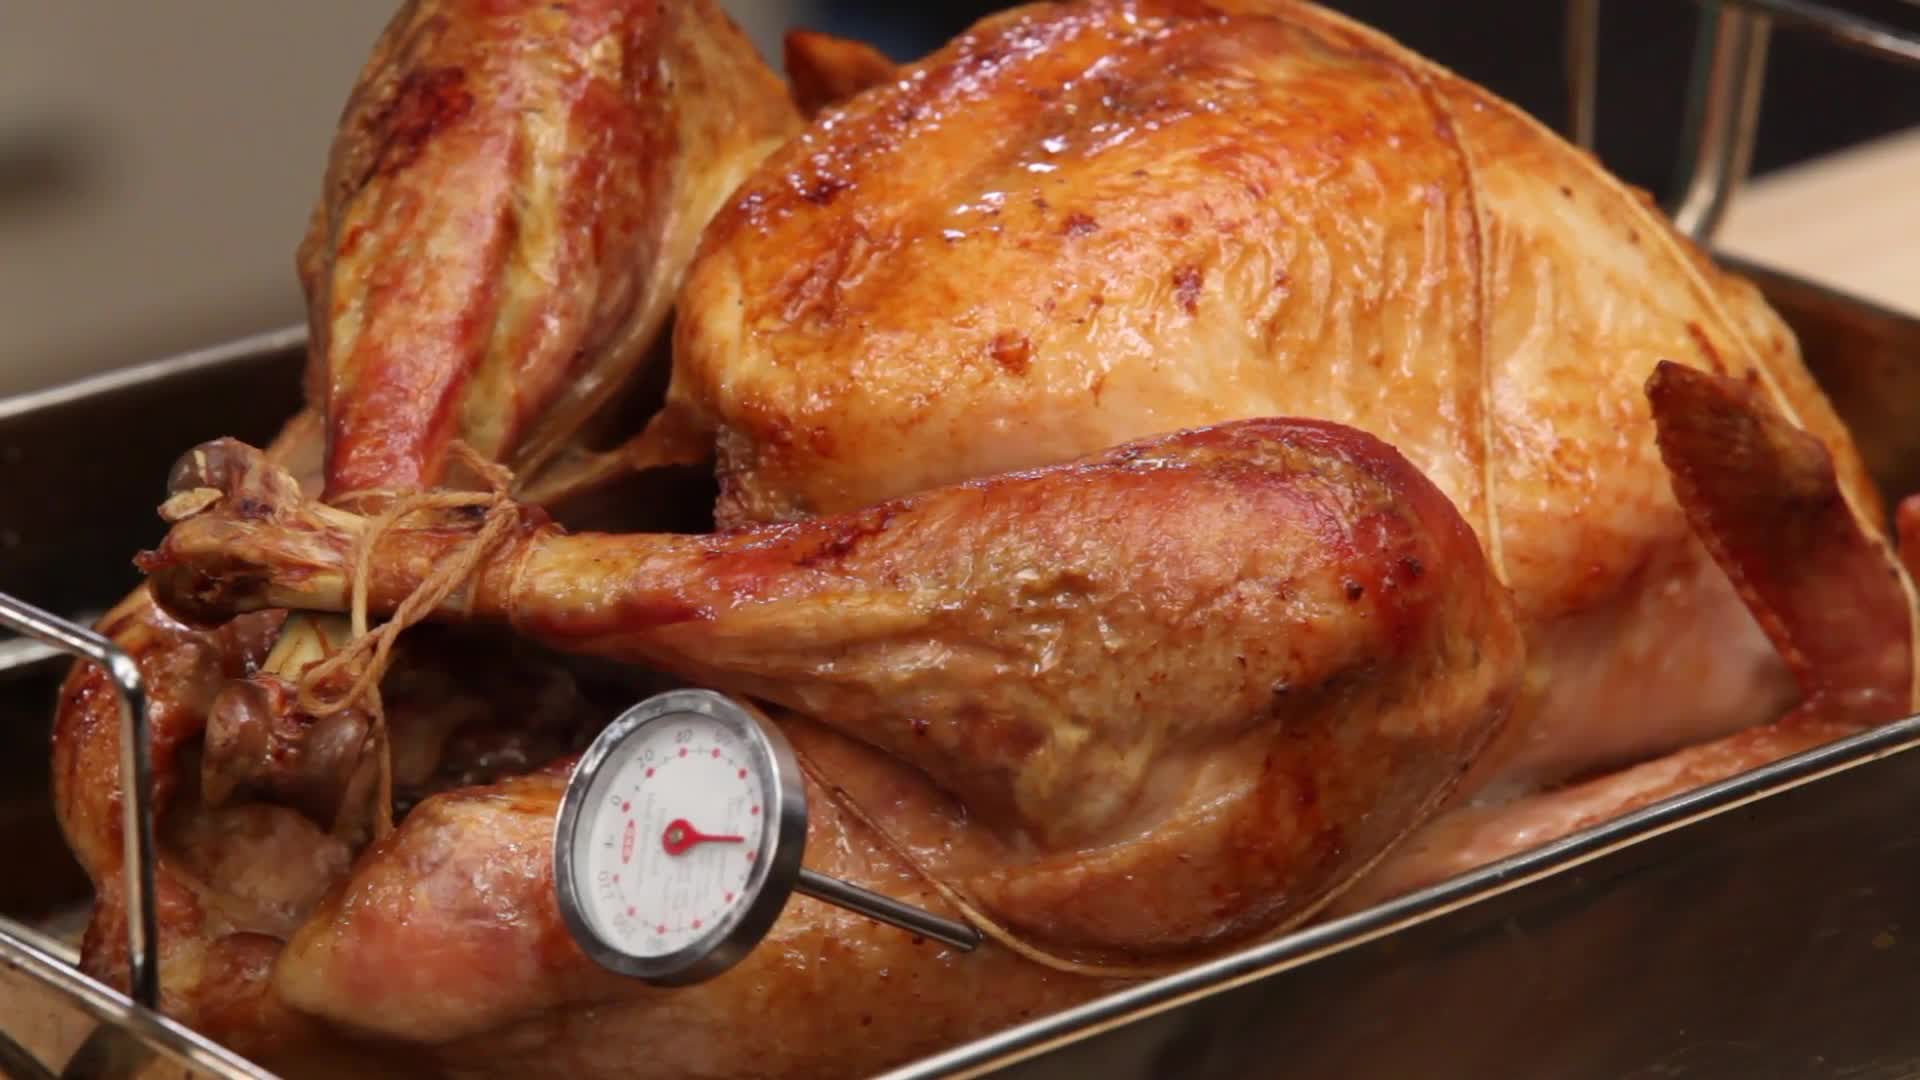 Use a meat thermometer for properly cooked turkey